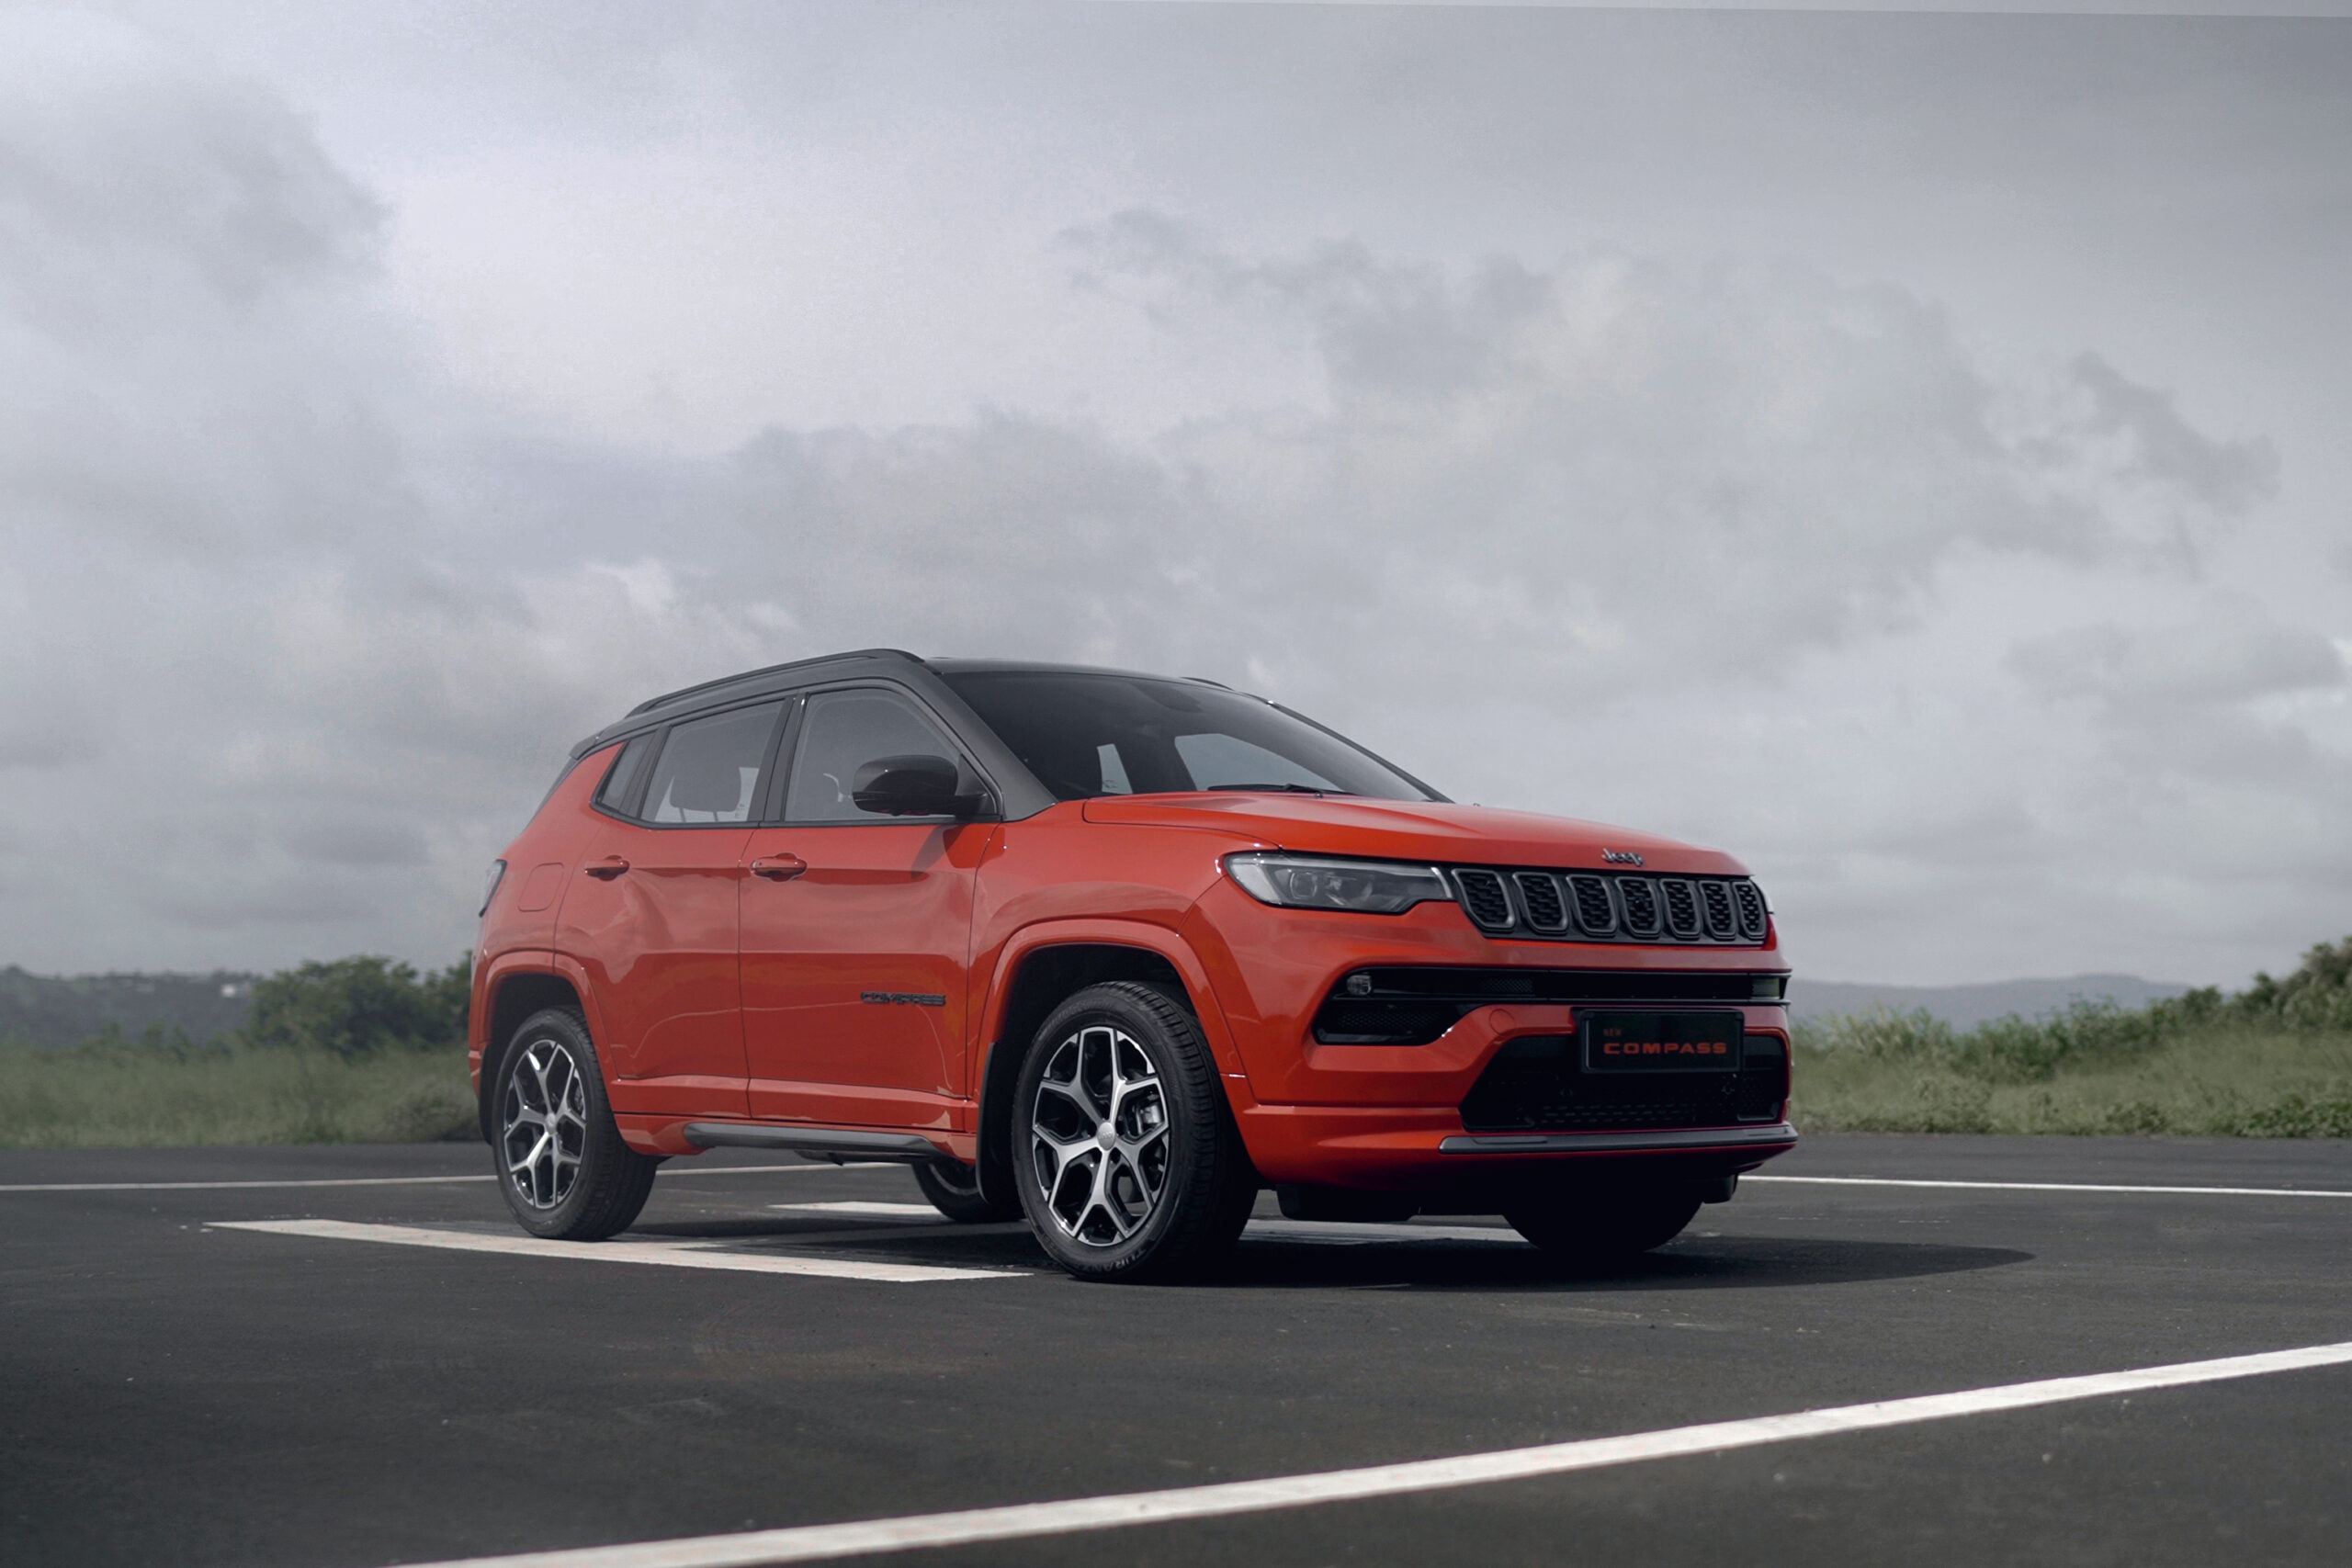 Jeep Compass: A new direction - Motoring World